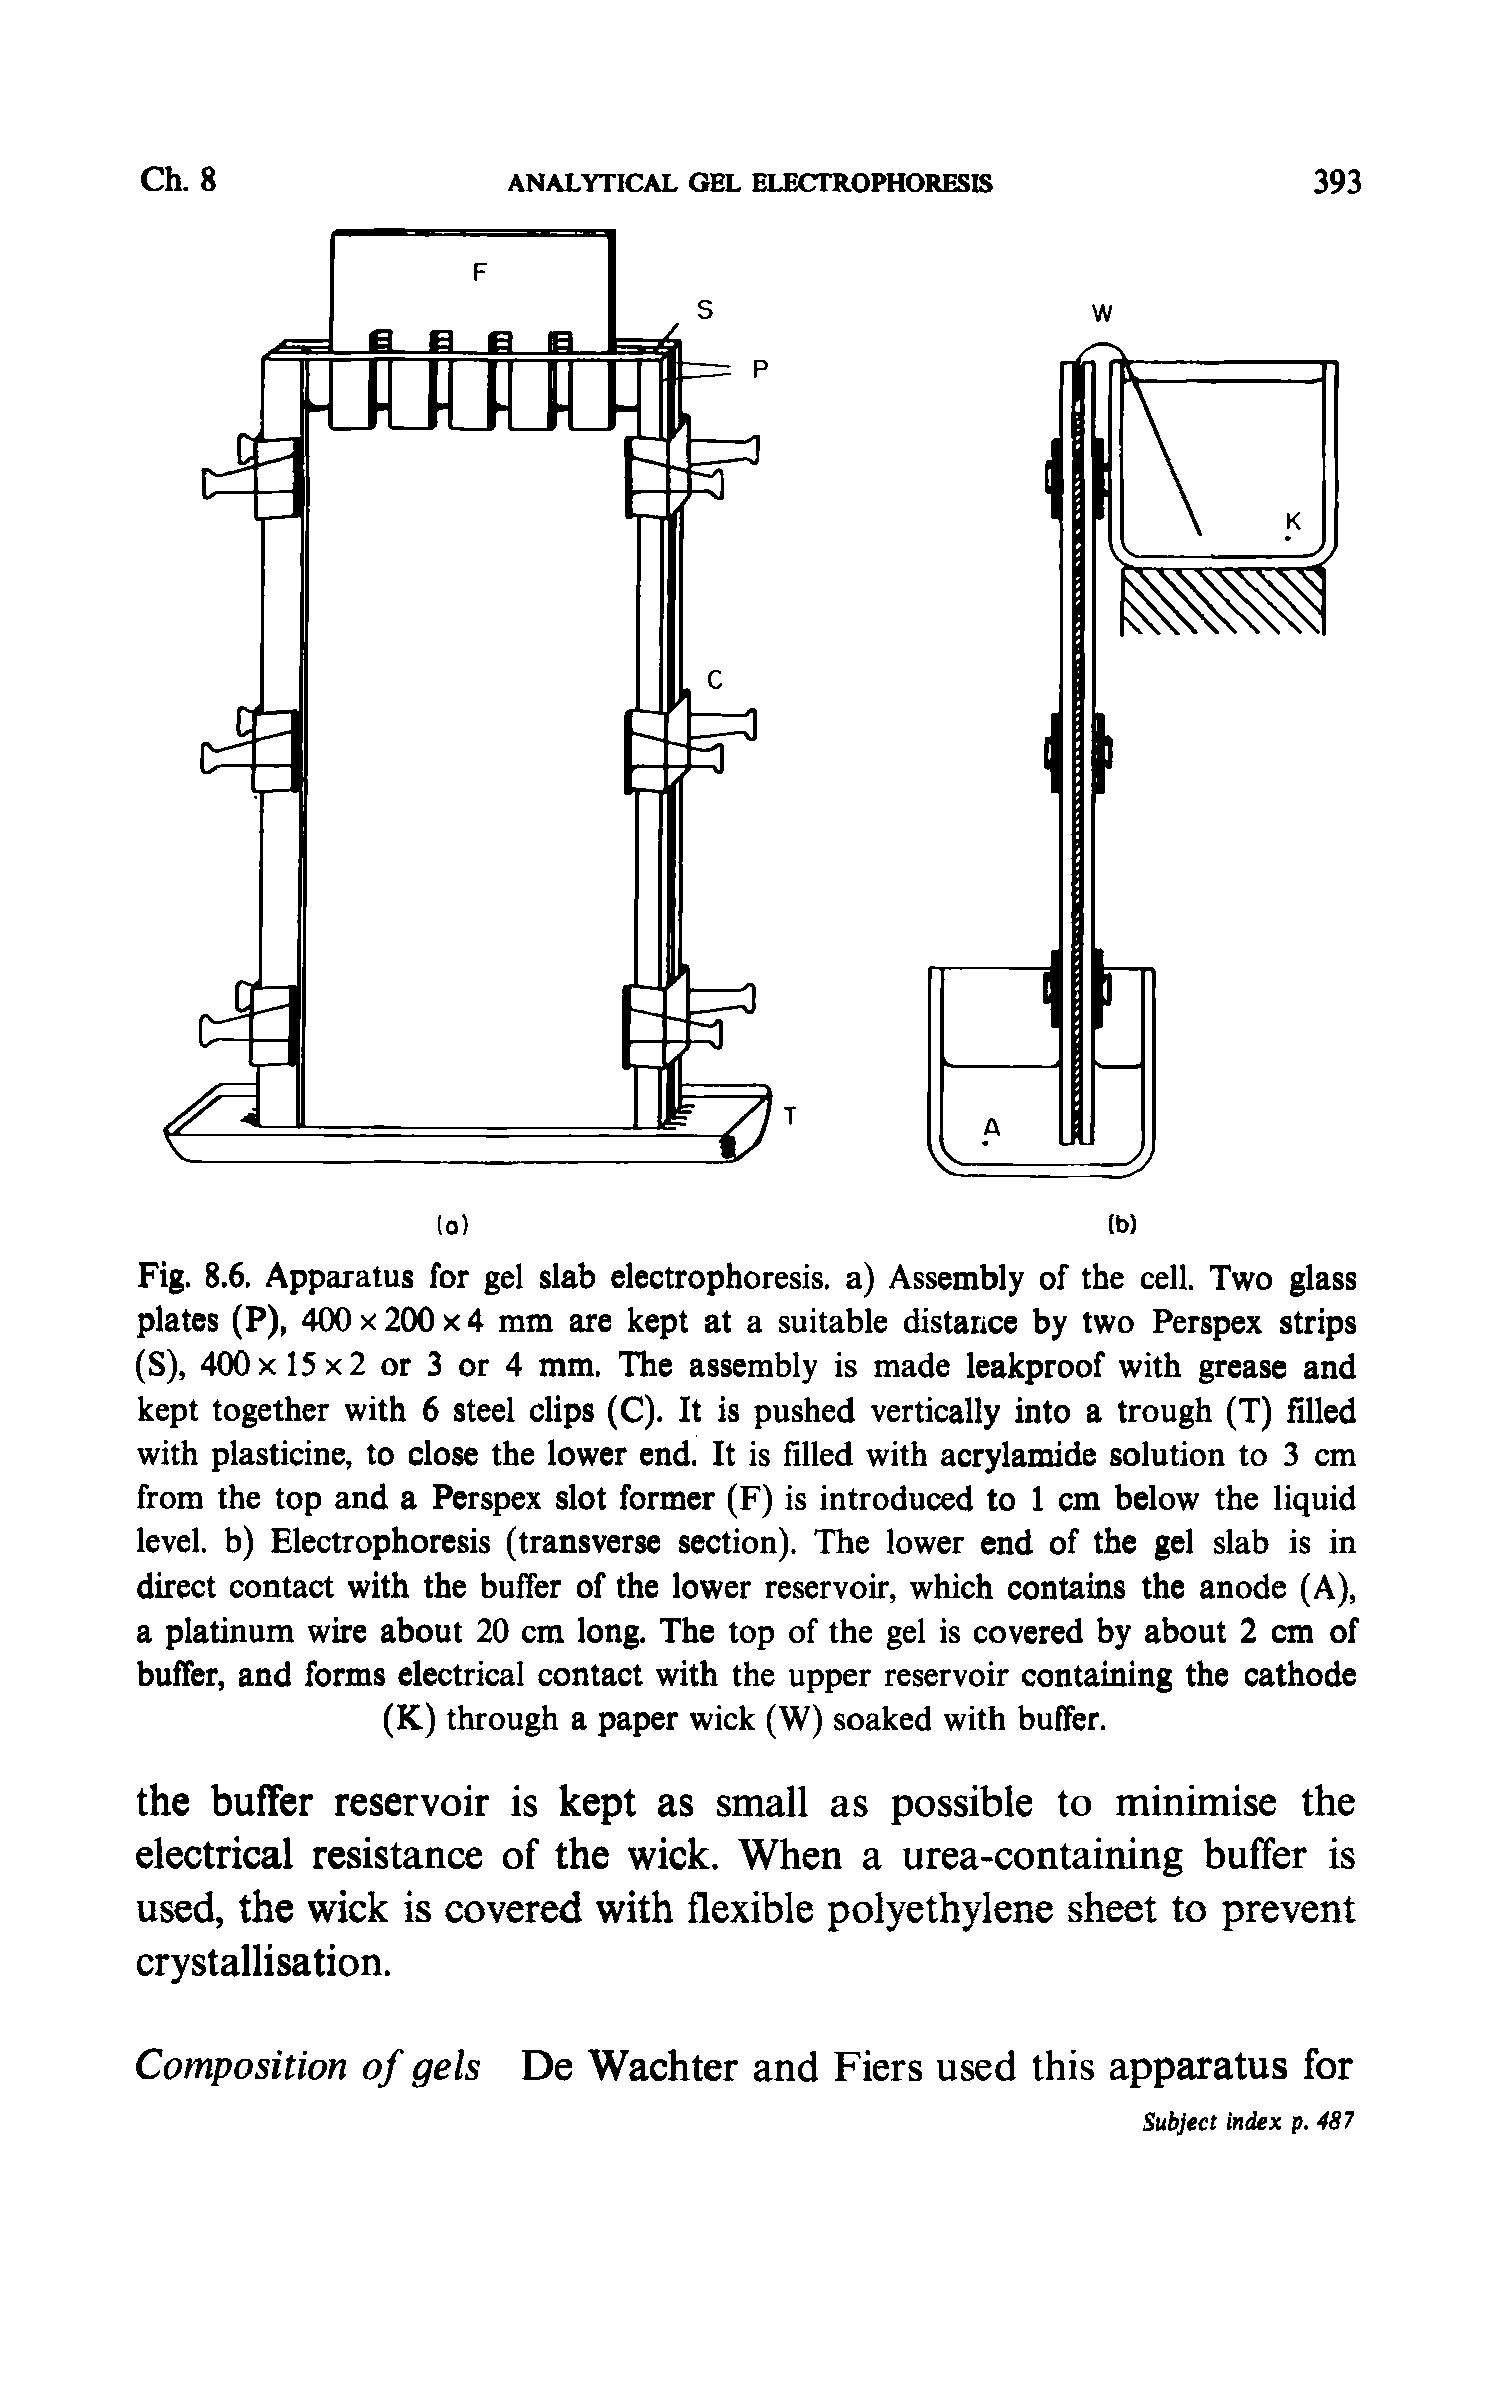 Fig. 8.6, Apparatus for gel slab electrophoresis, a) Assembly of the cell. Two glass plates (P), 400 x 200 x 4 mm are kept at a suitable distance by two Perspex strips (S), 400 X 15 x 2 or 3 or 4 mm. The assembly is made leakproof with grease and kept together with 6 steel clips (C). It is pushed vertically into a trough (T) filled with plasticine, to close the lower end. It is filled with acrylamide solution to 3 cm from the top and a Perspex slot former (F) is introduced to 1 cm below the liquid level, b) Electrophoresis (transverse section). The lower end of the gel slab is in direct contact with the buffer of the lower reservoir, which contains the anode (A), a platinum wire about 20 cm long. The top of the gel is covered by about 2 cm of buffer, and forms electrical contact with the upper reservoir containing the cathode (K) through a paper wick (W) soaked with buffer.